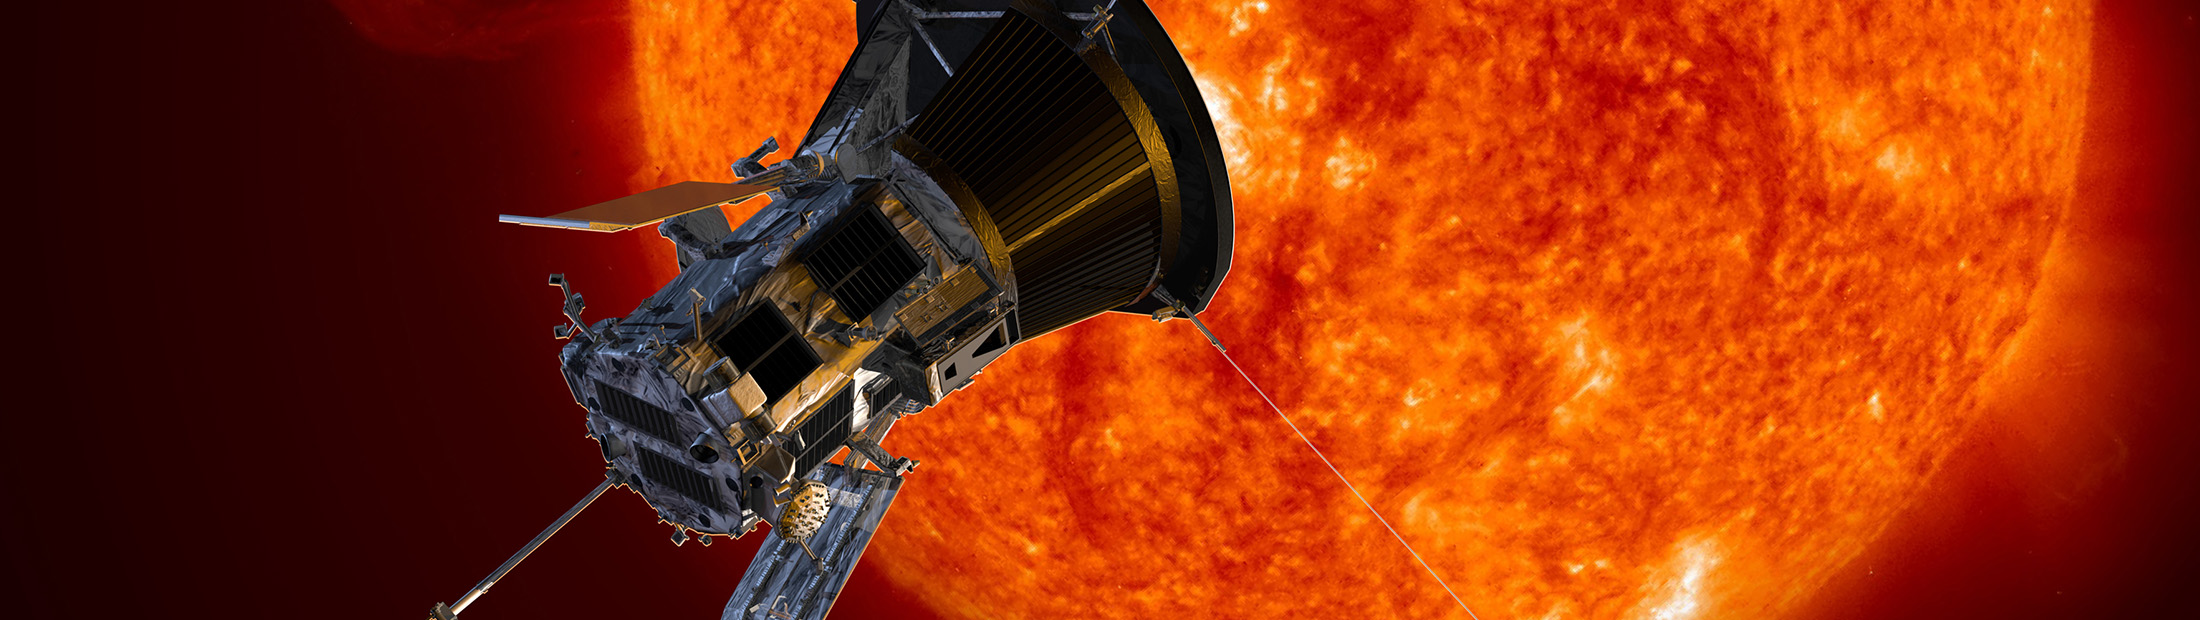 Digital illustration of the Parker Solar Probe approaching the Sun